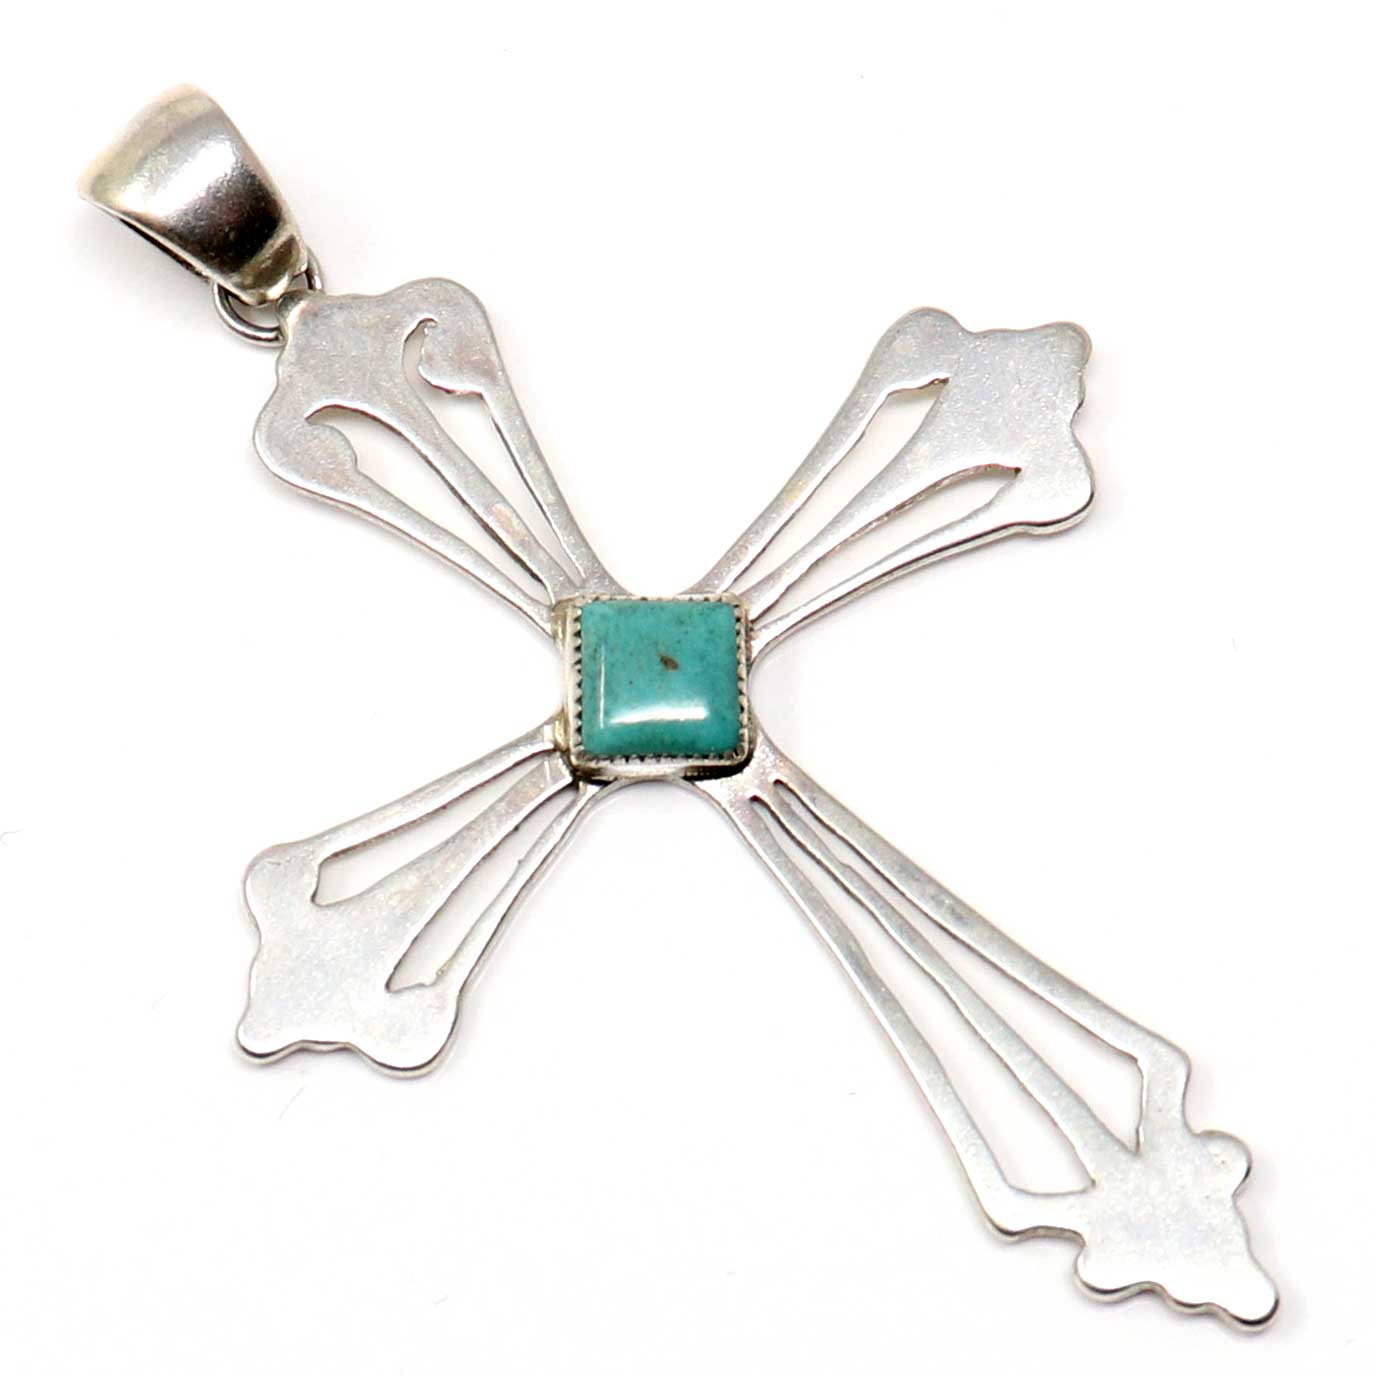 Turquoise and Sterling Silver Cross